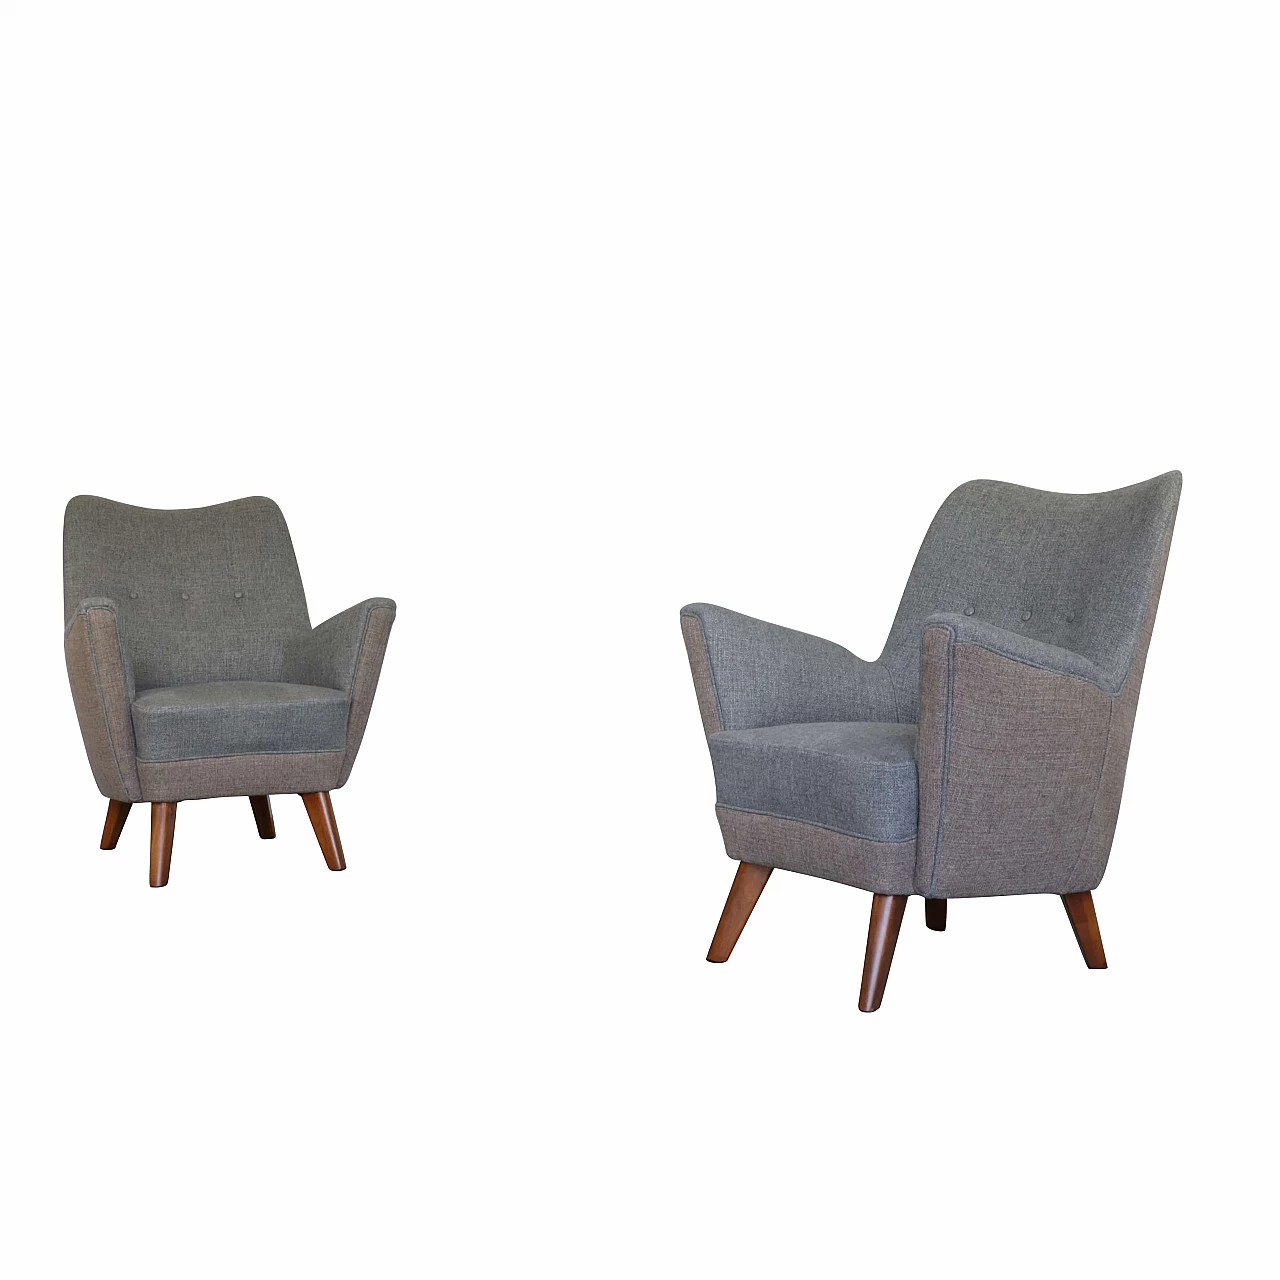 Pair of two-tone ship's armchairs, 1950s 1270350